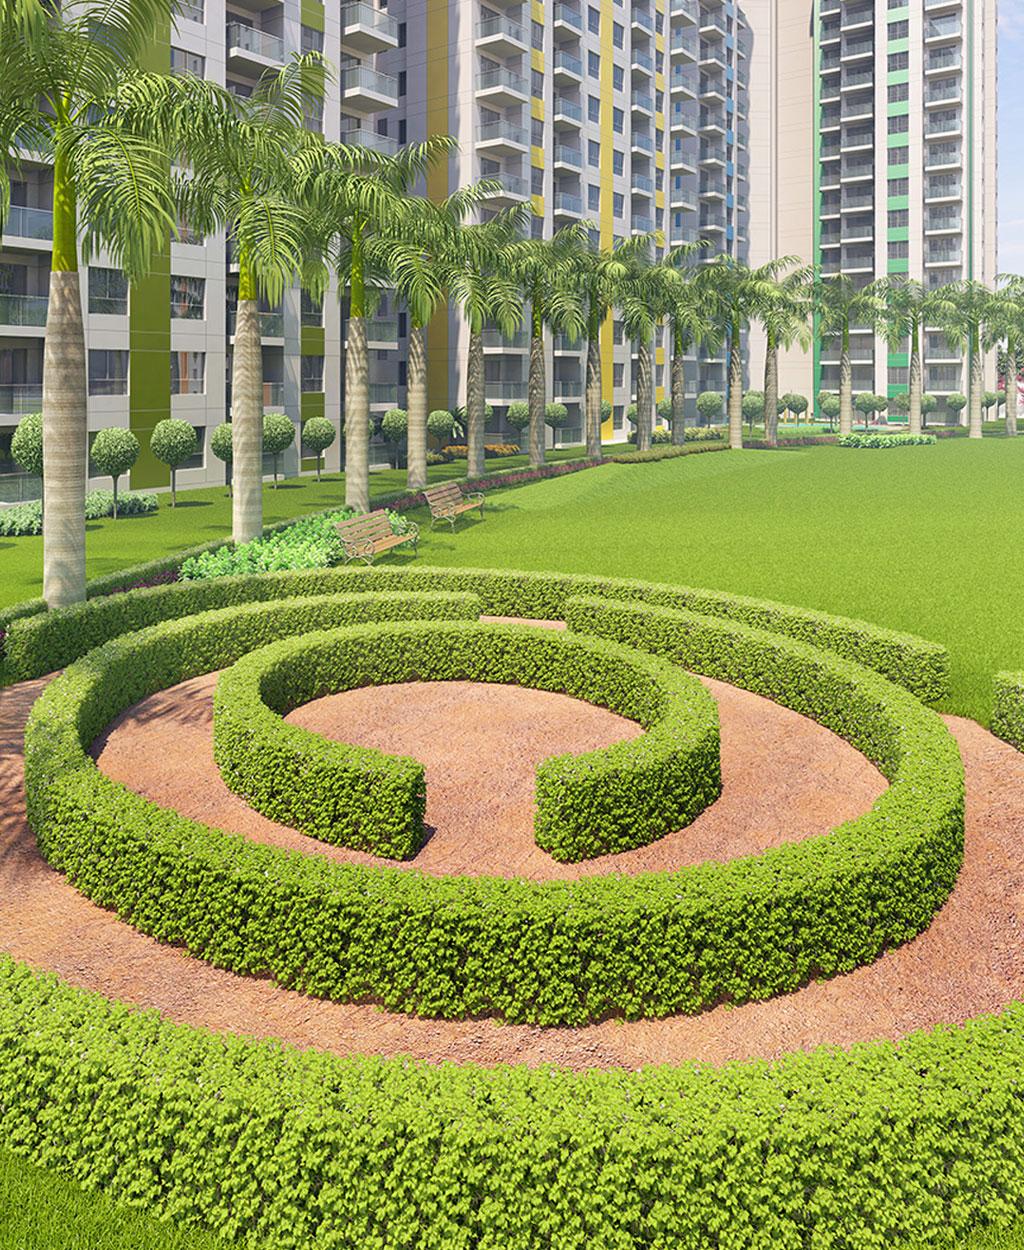 3bhk flats in mohali